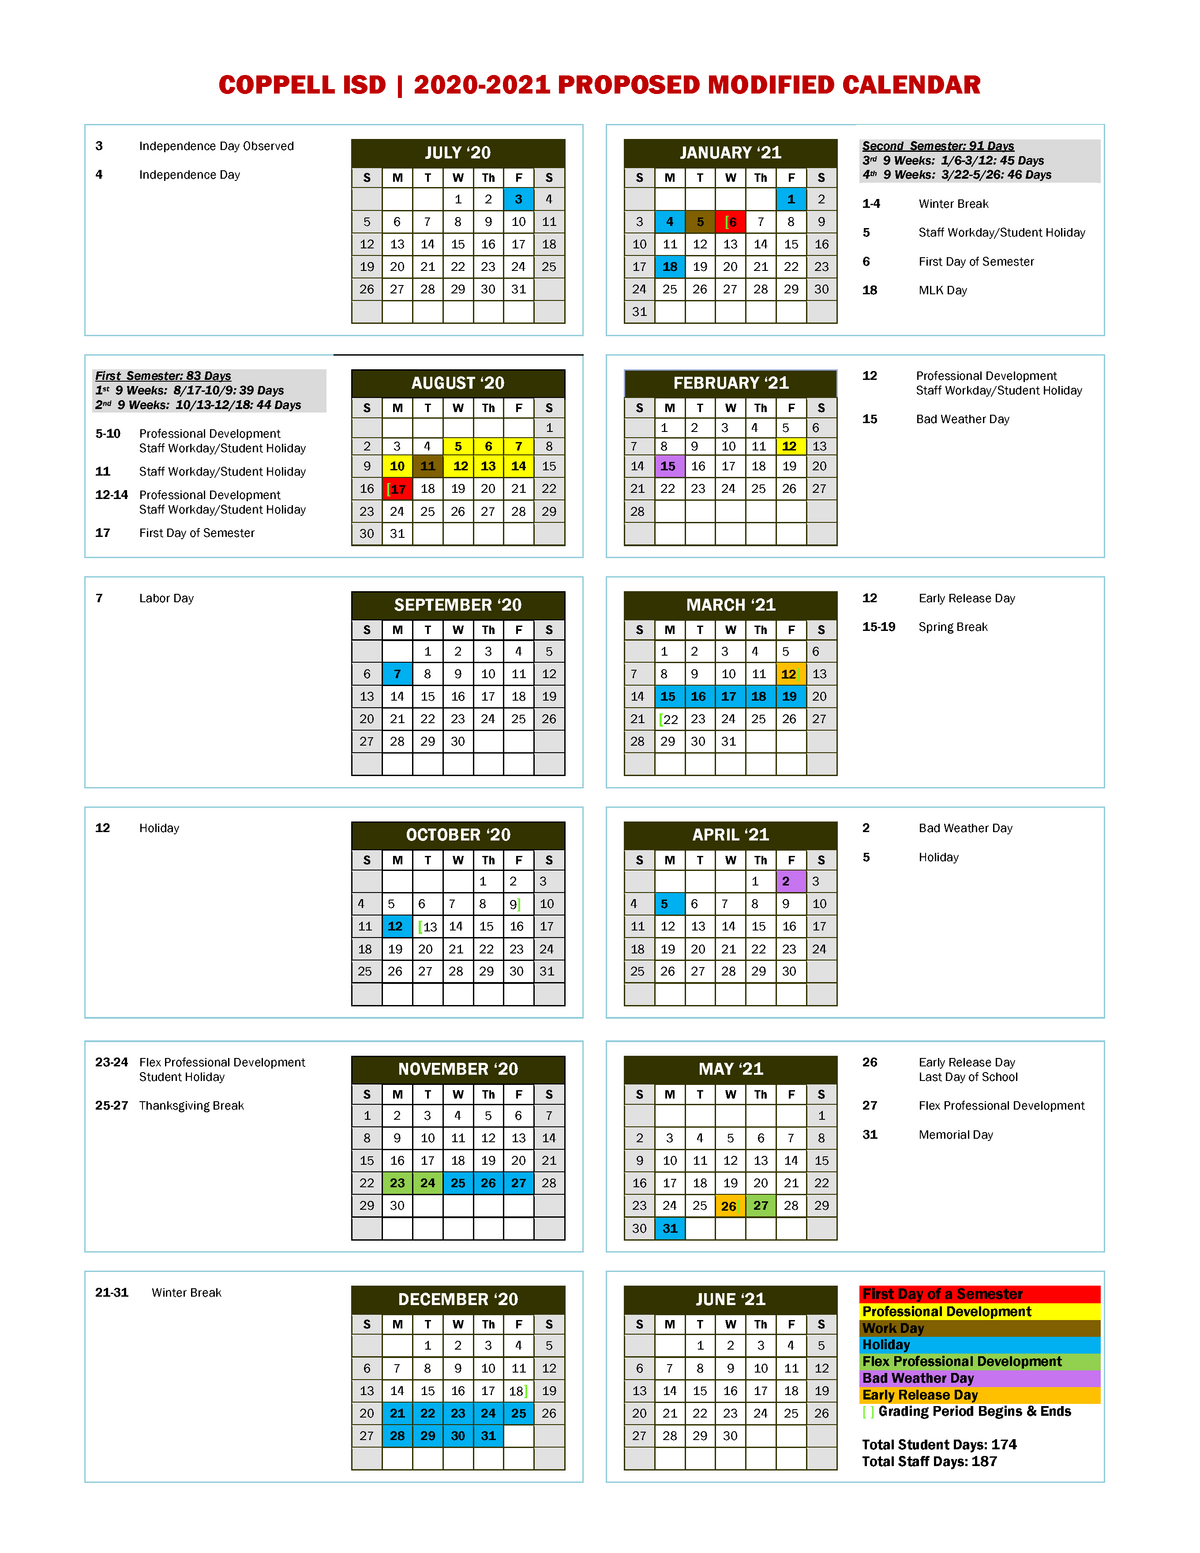 2020 2021 Proposed Modified Calendar COPPELL ISD 2020 2021 PROPOSED MODIFIED CALENDAR 3